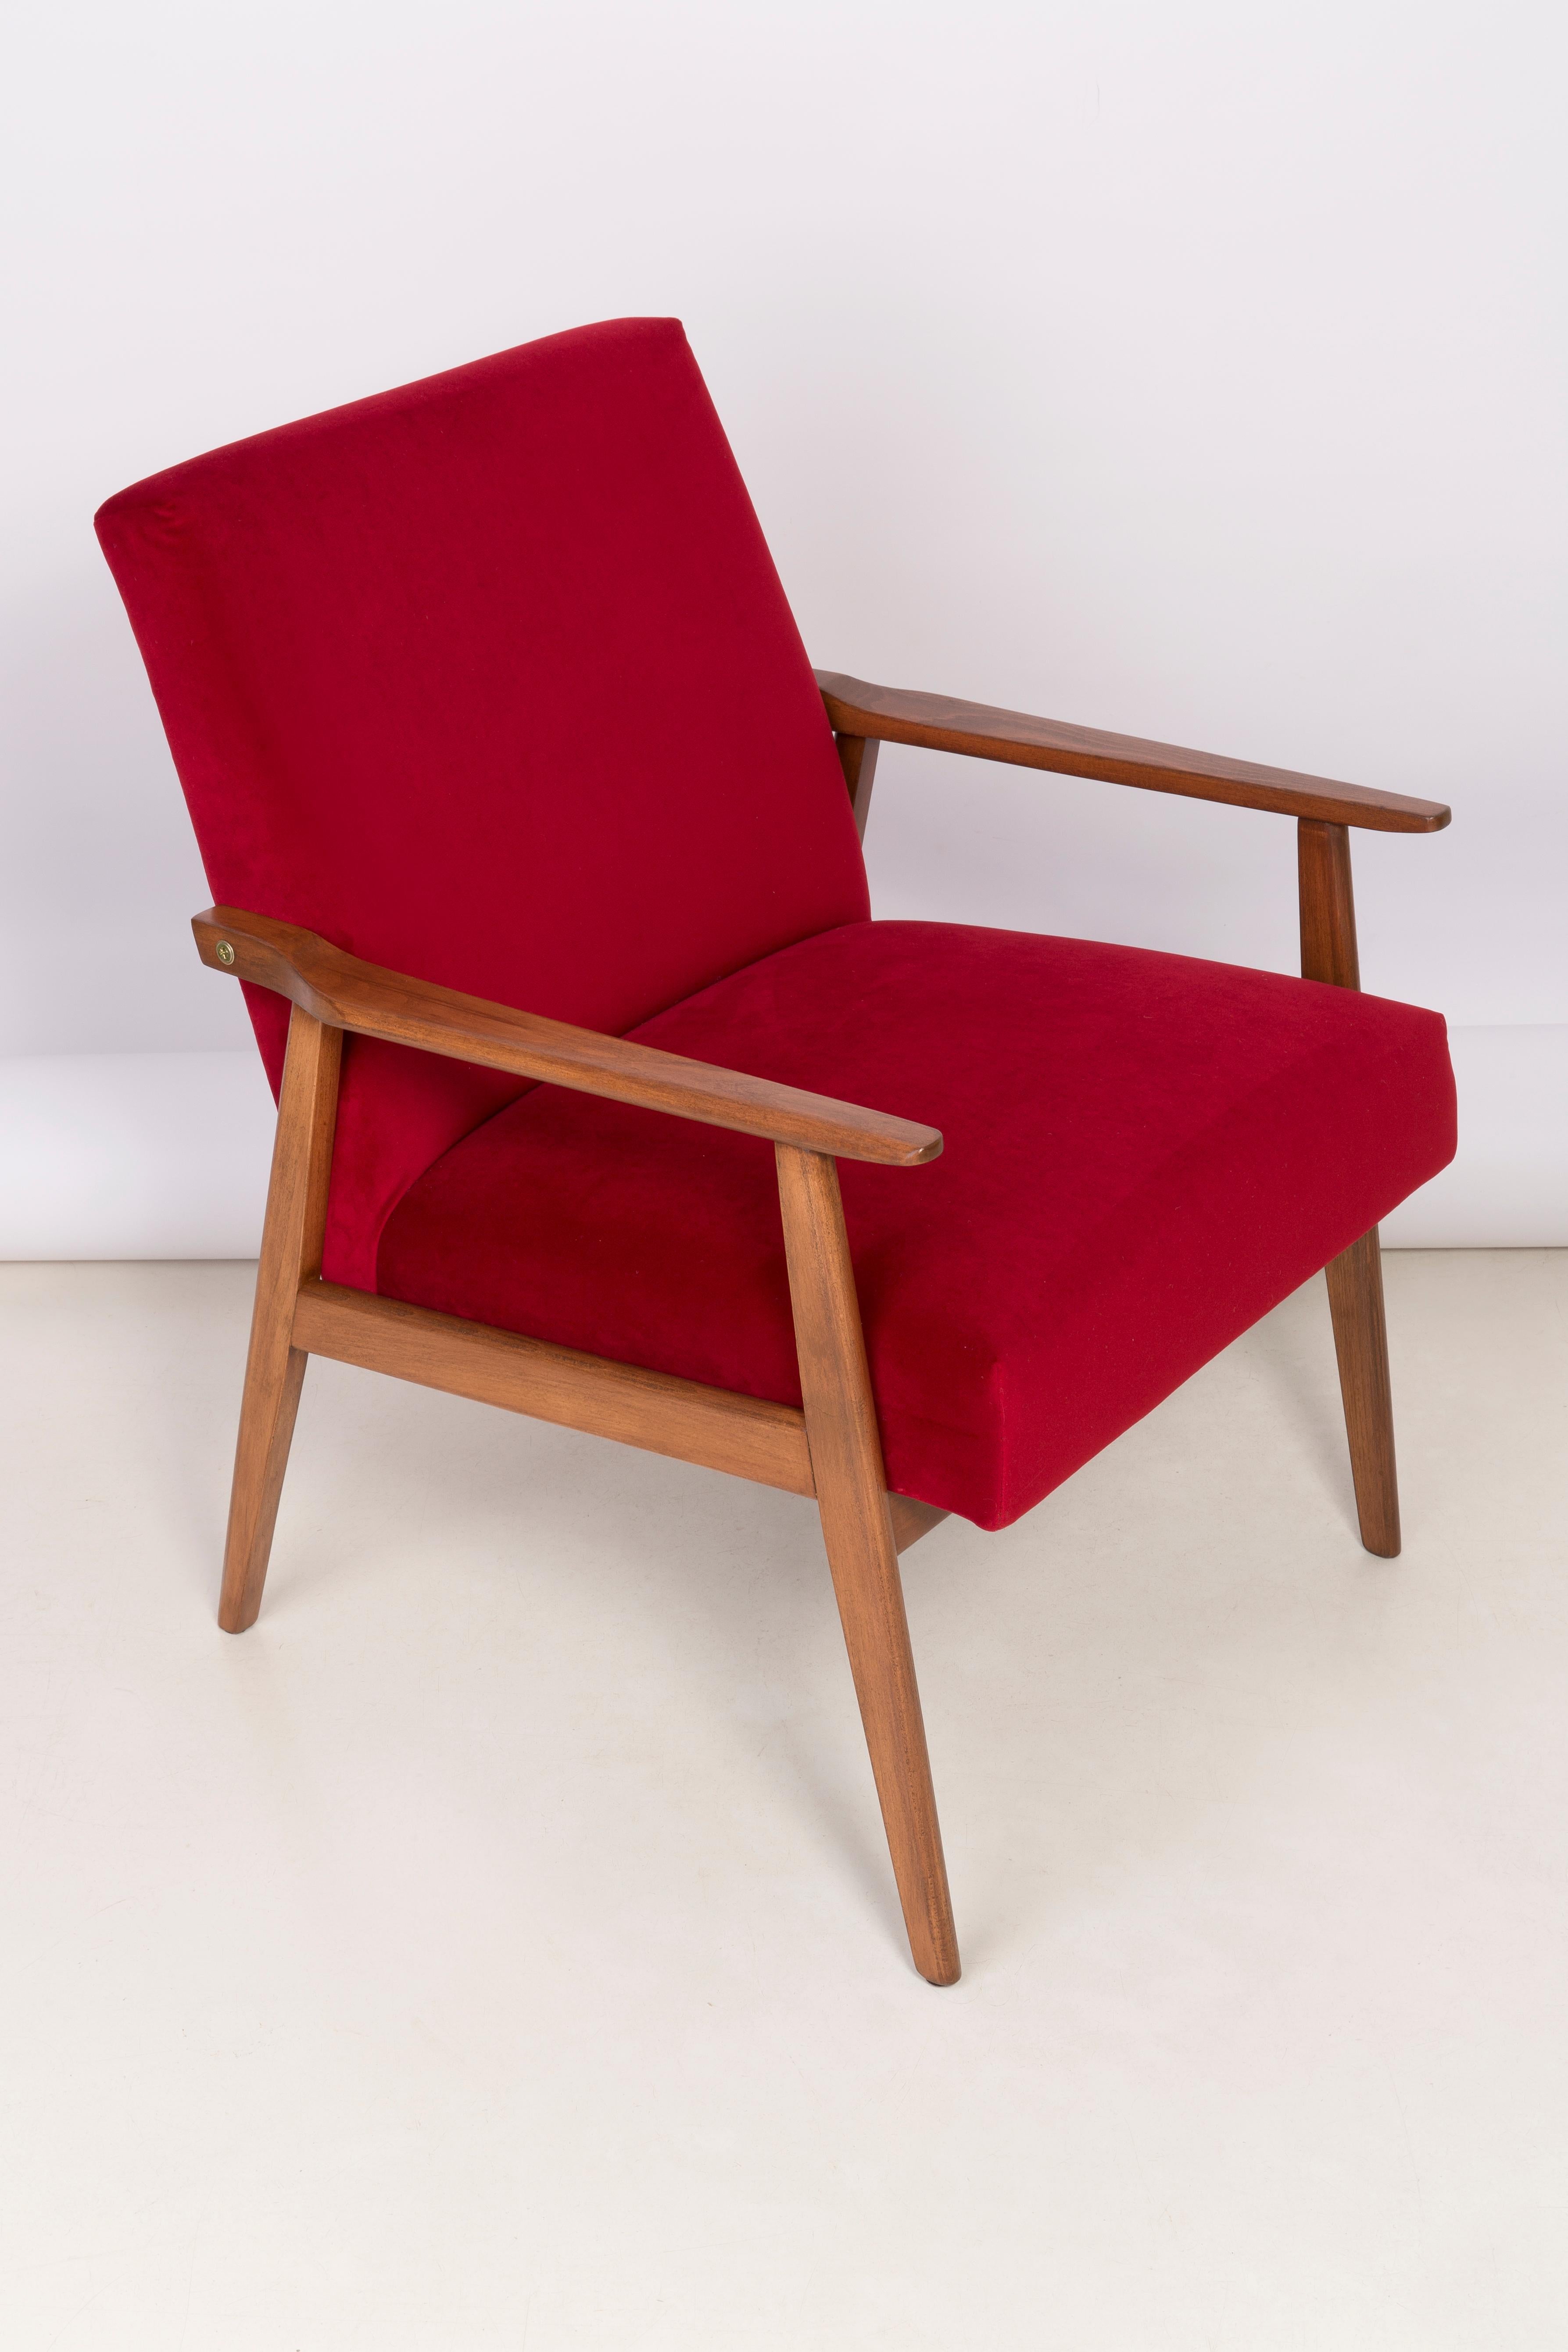 Set of Four Midcentury Red Velvet Dante Armchairs, Europe, 1960s For Sale 3